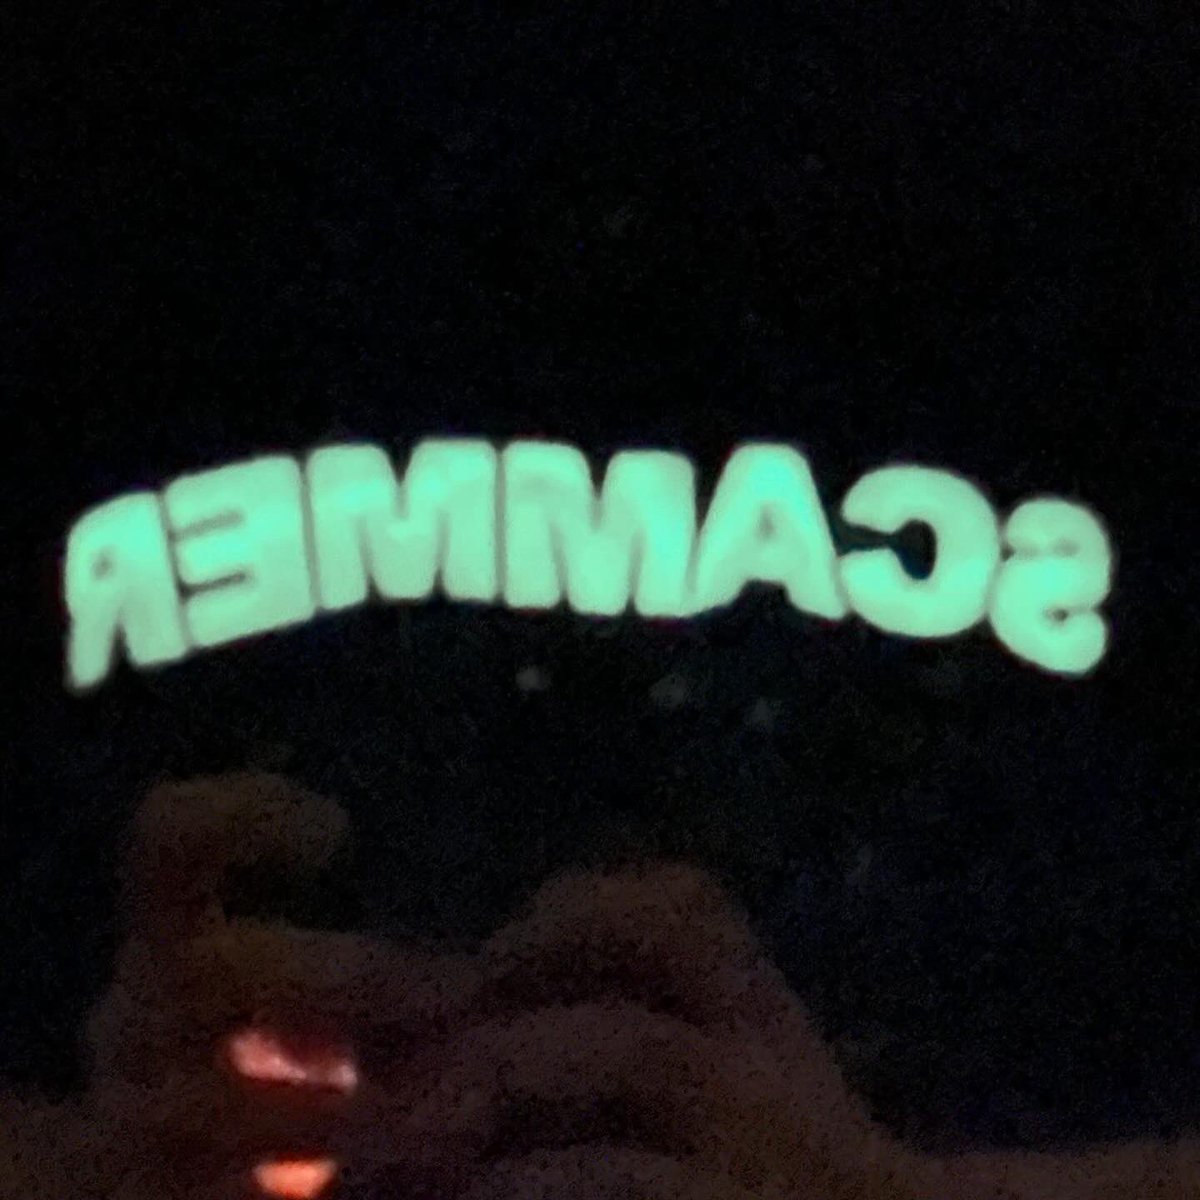 THE GLOW IN THE DARK SCAMMER SHIRT RE-STOCK IS NOW AVAILABLE AT AMNESIASCANNER.COM. LIMITED EDITION 👽